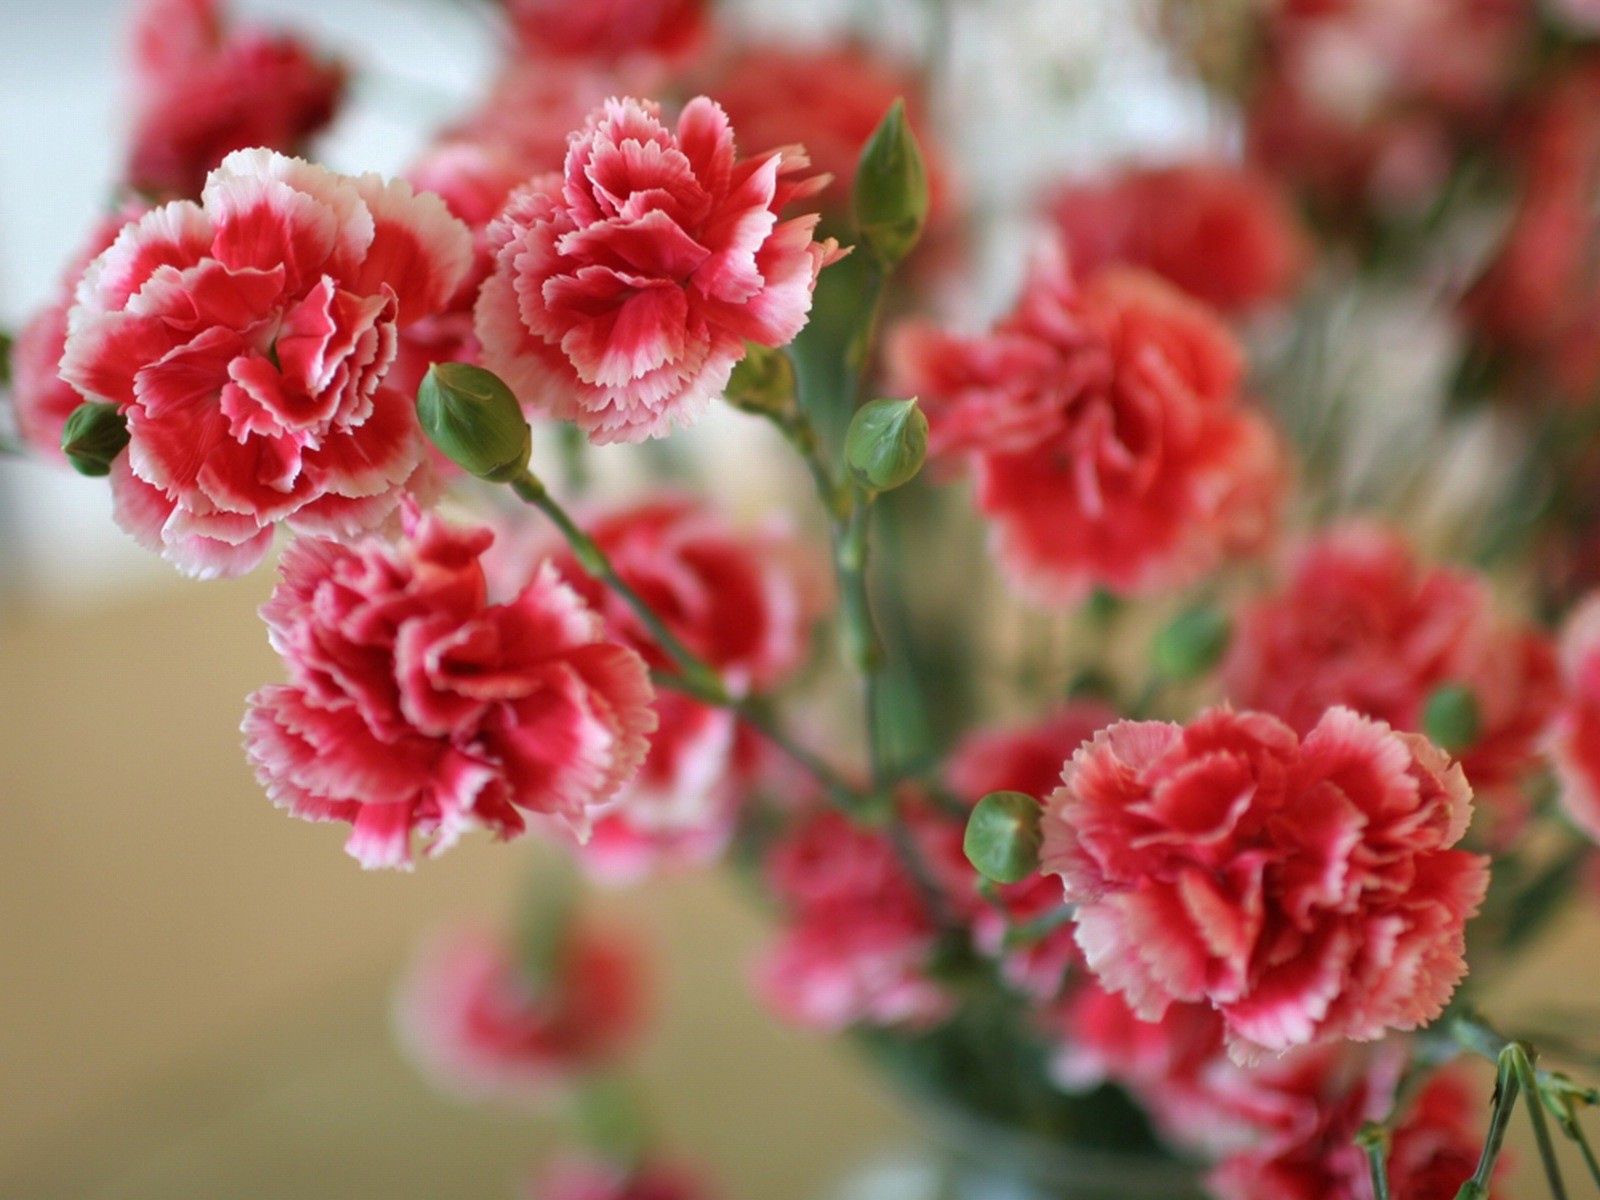 Popular Carnations Image for Phone